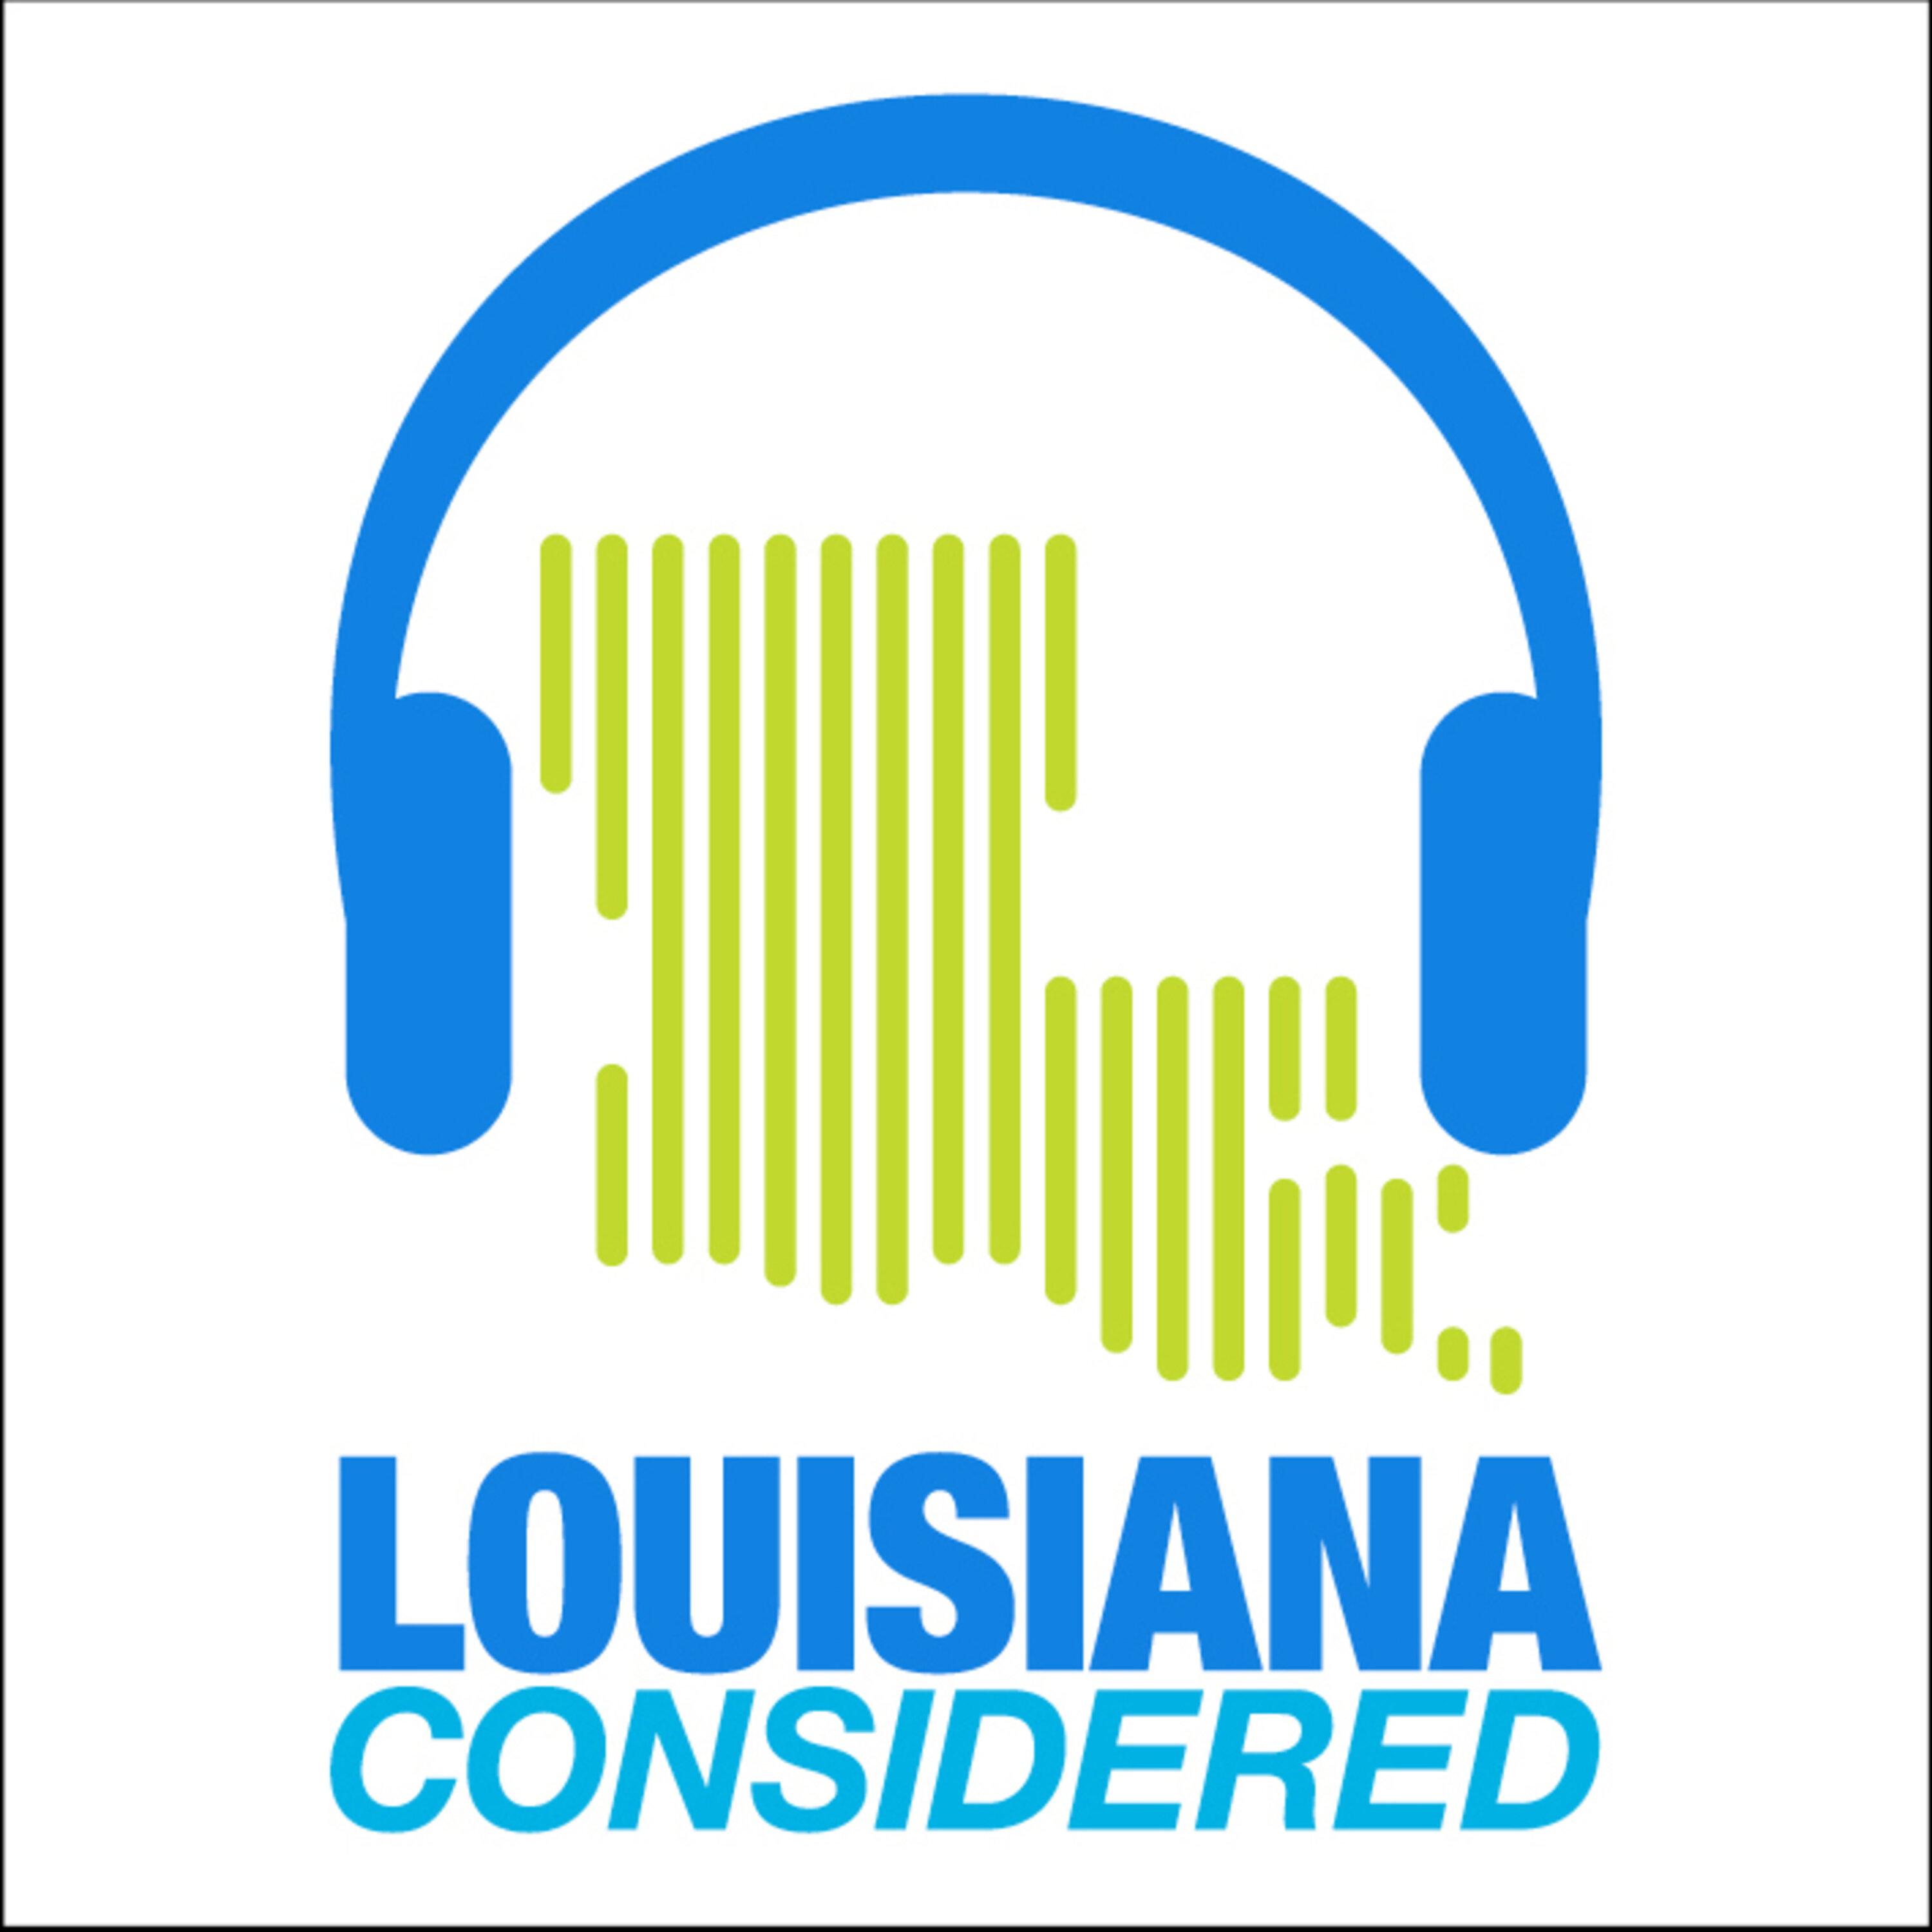 Thumbnail for "How Louisiana is expanding breastfeeding services and consultation statewide".